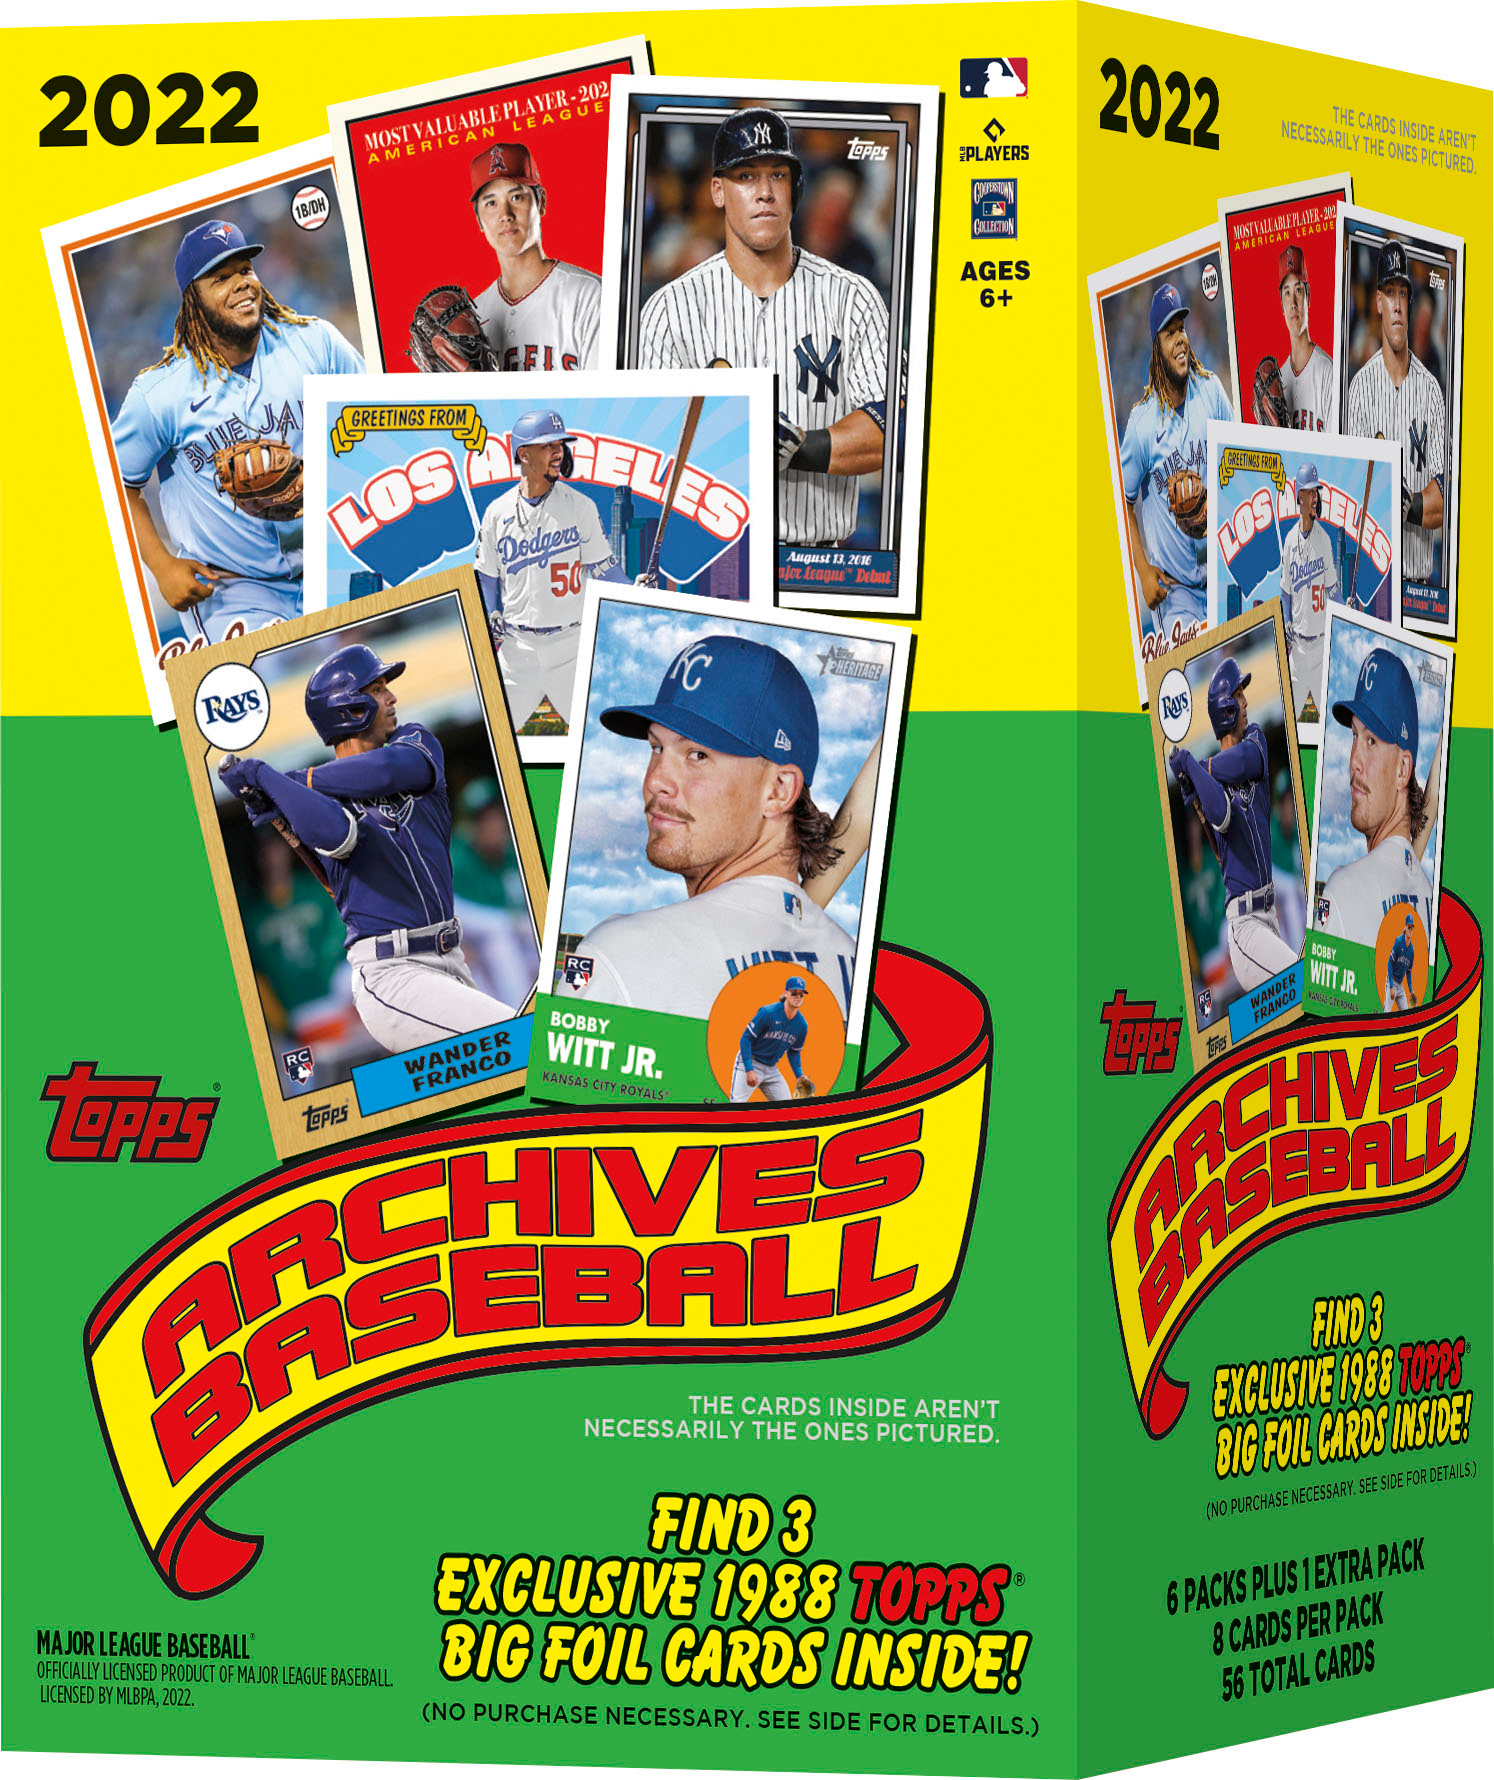 Baseball cards: A review of Dodgers cards in 2022 Topps Series 1